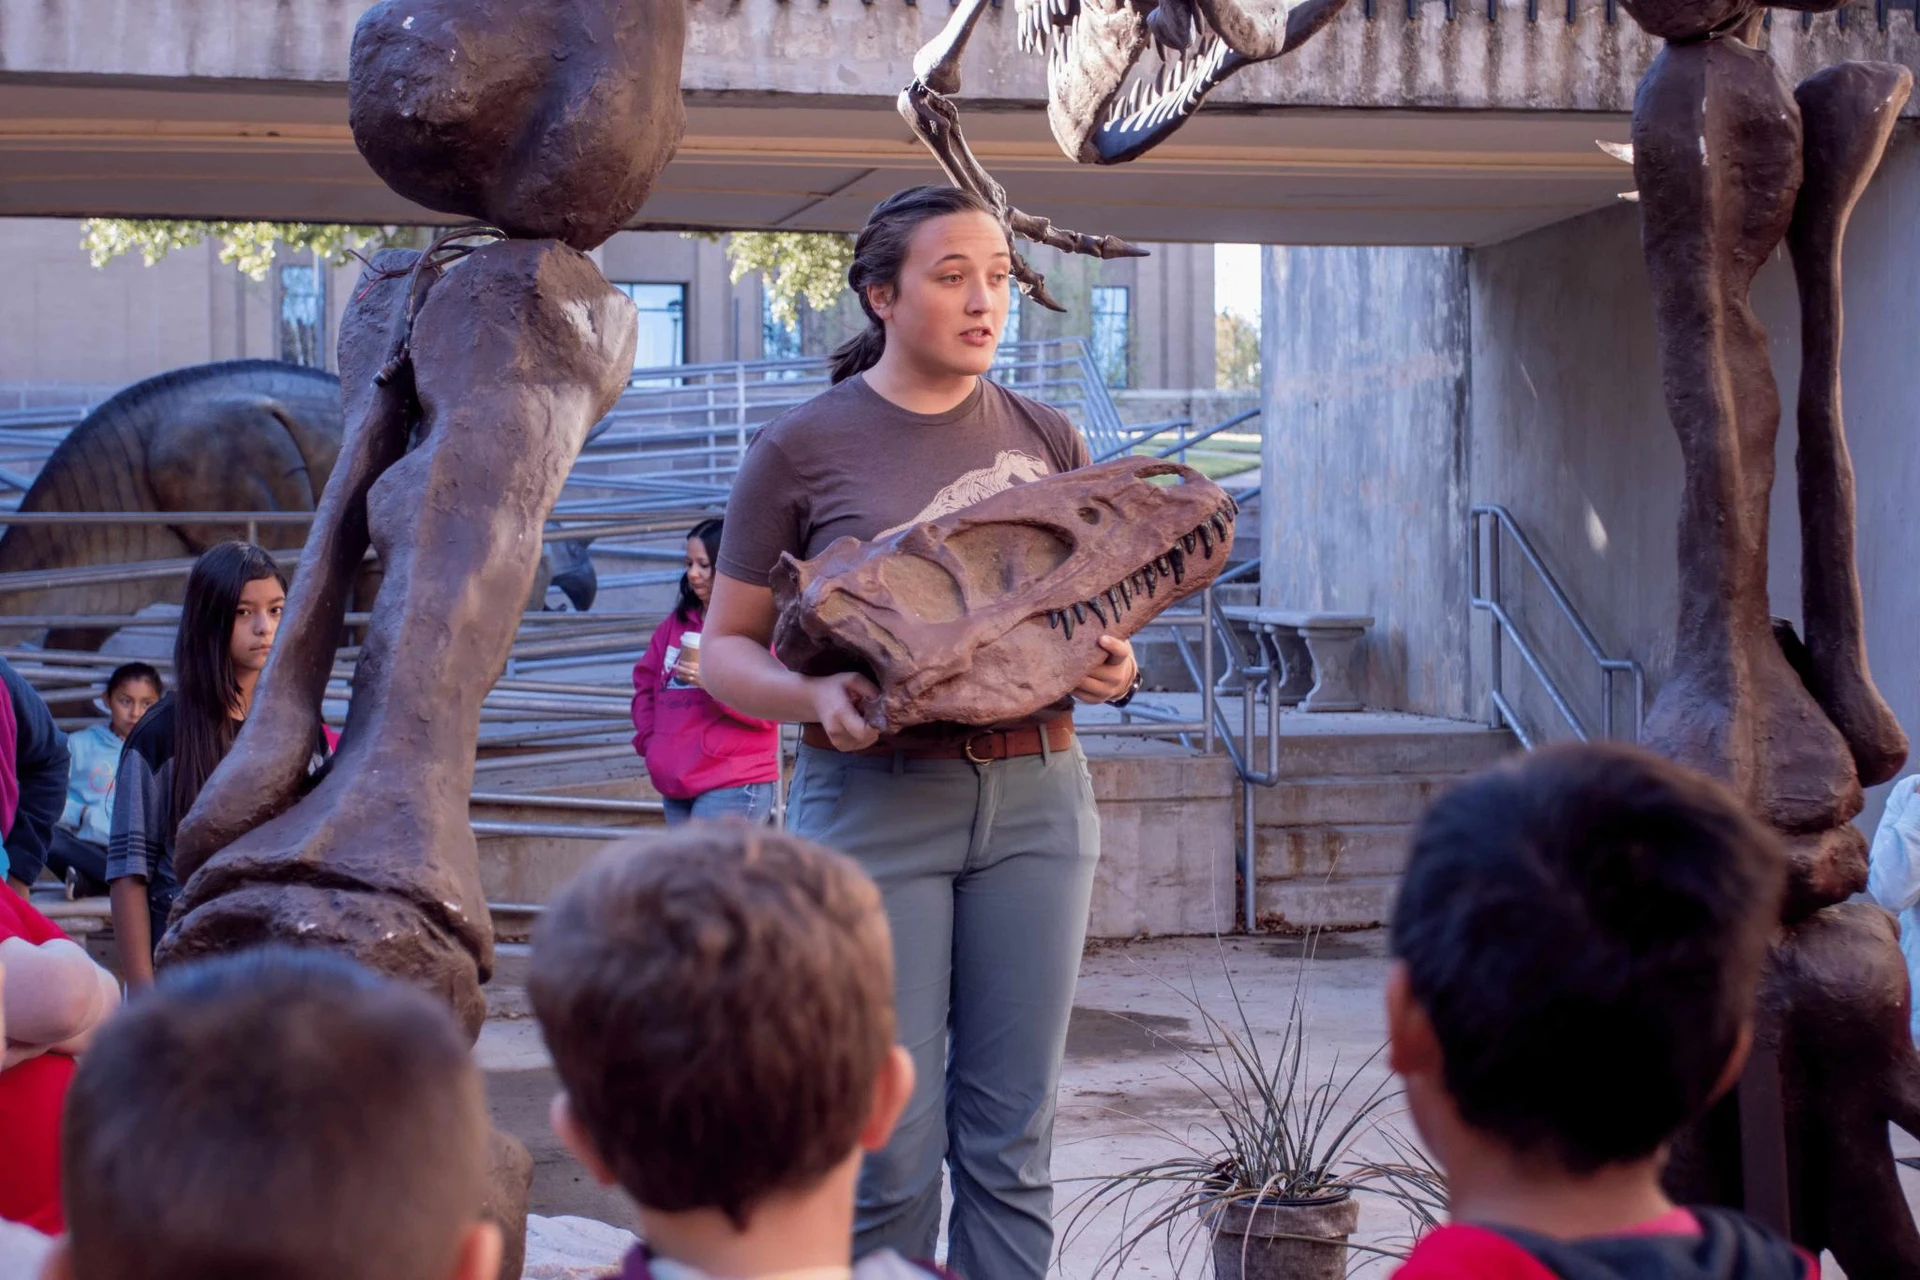 A dinosaur museum worker talks to the audience of children as she explains the dinosaur skull in her hands